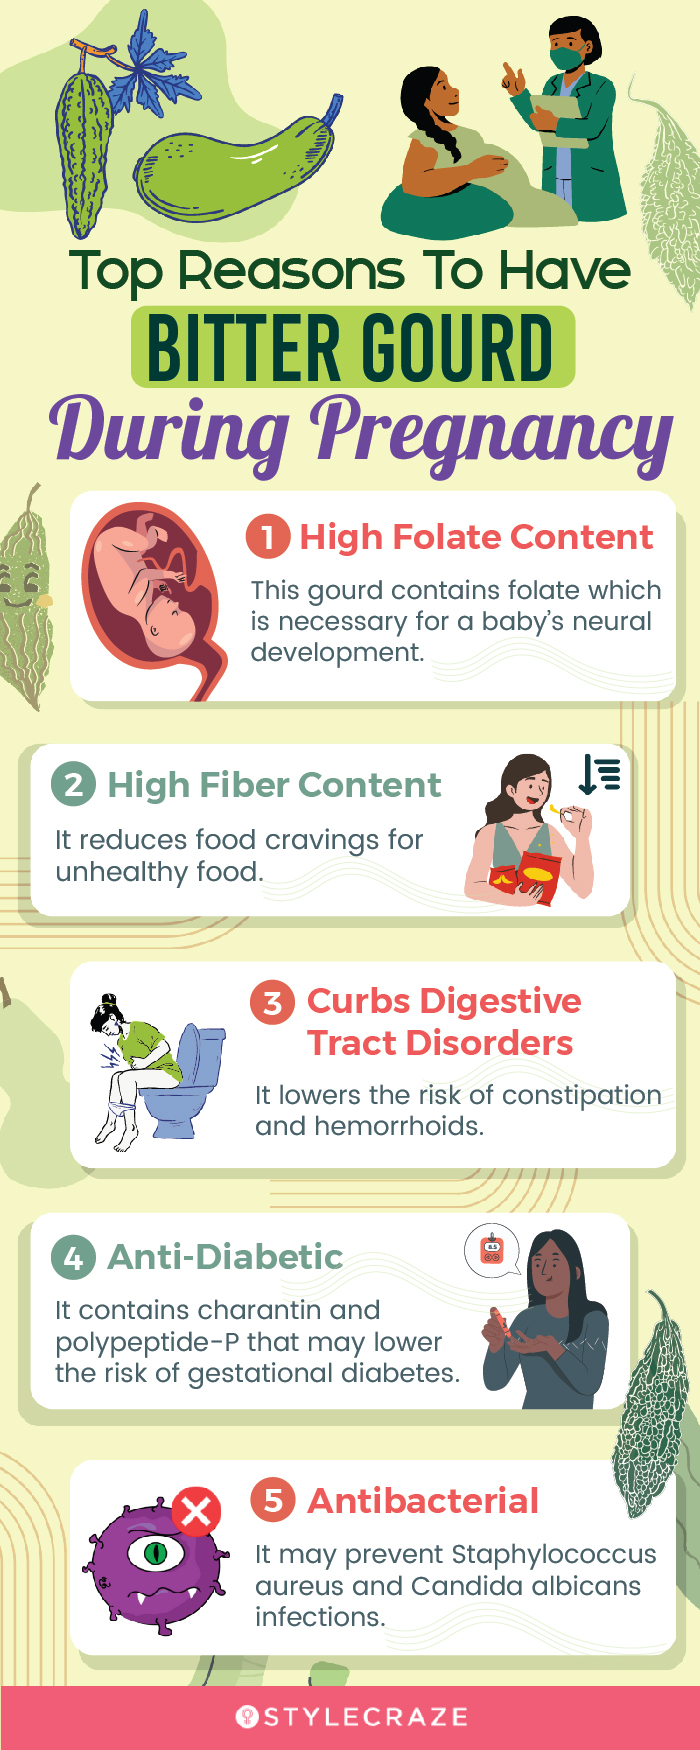 top reasons to have bitter gourd during pregnancy (infographic)